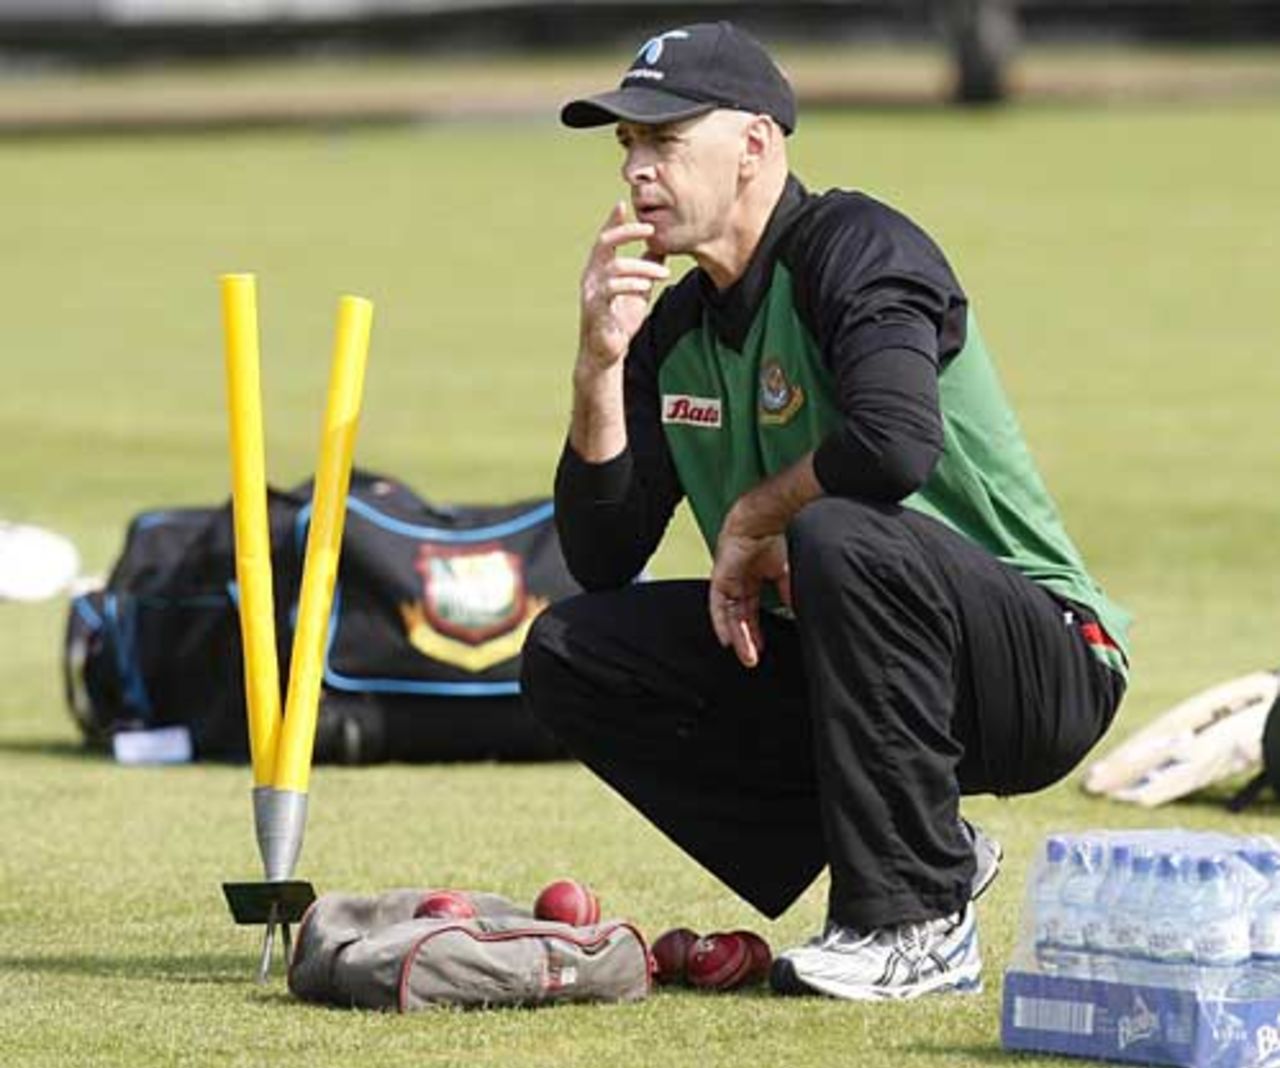 Jamie Siddons, the Bangladesh coach, ponders his options during training, Lord's, May 25, 2010